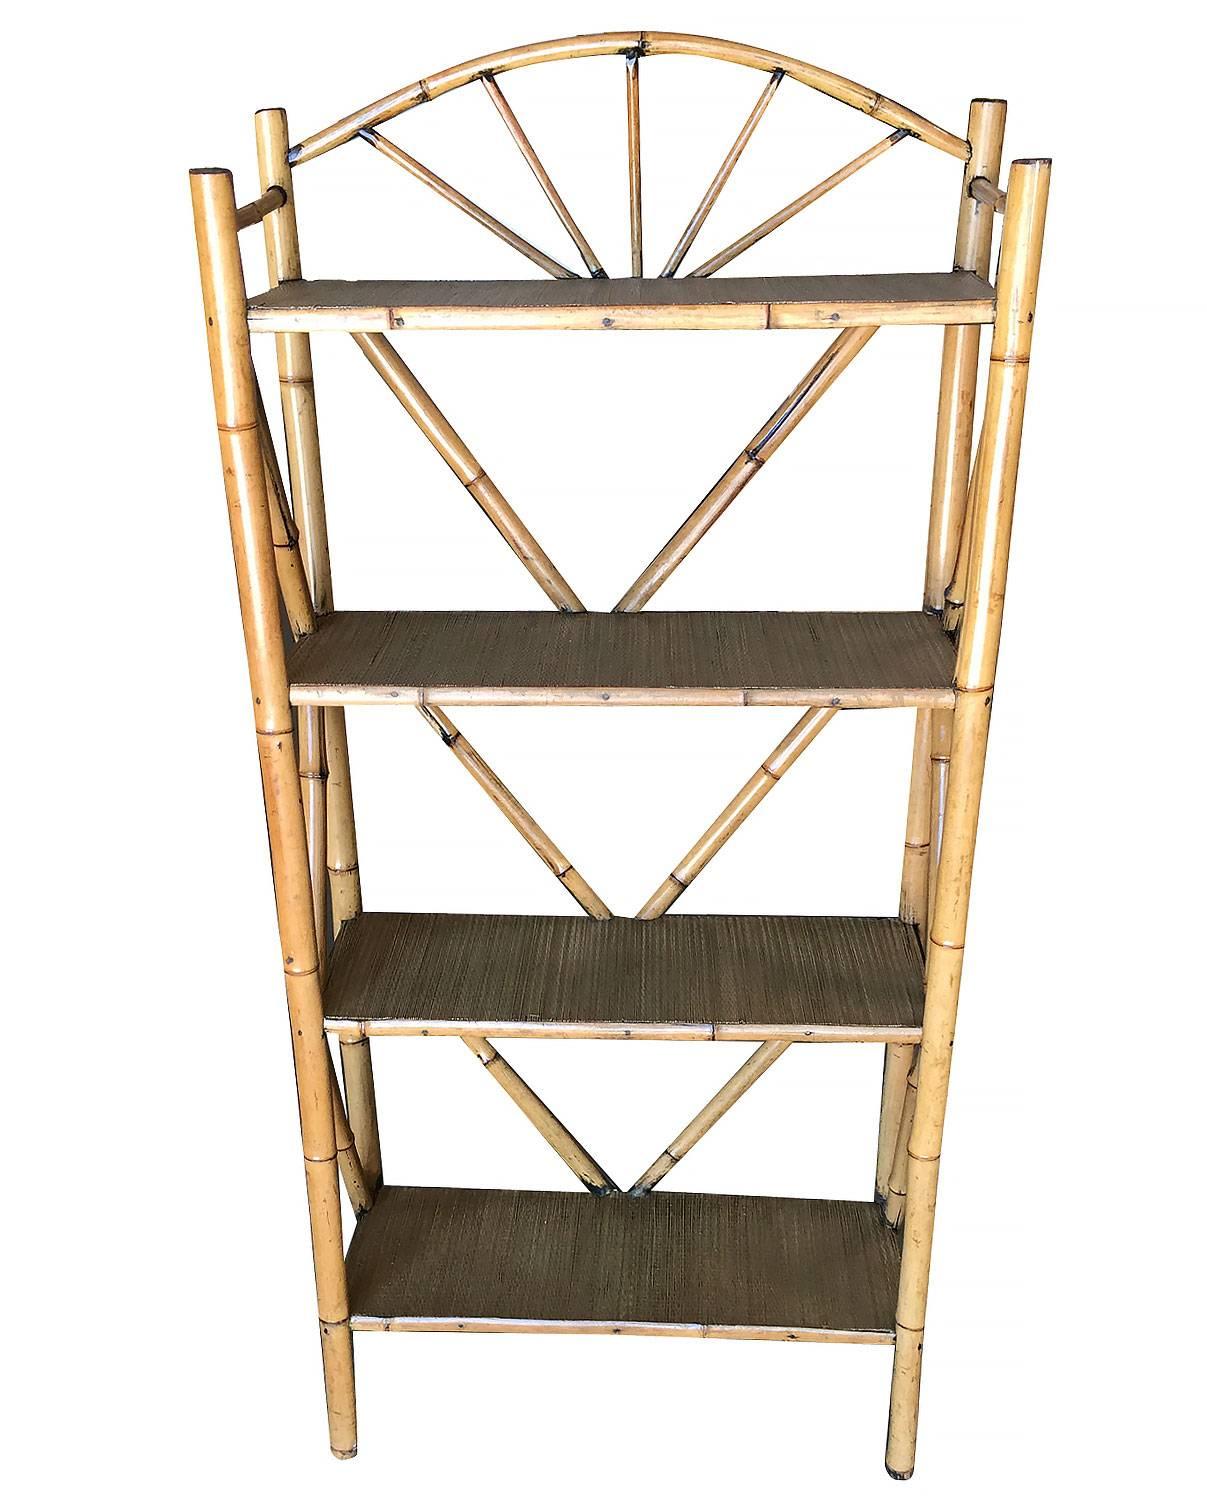 Antique circa 1900s four level tiger bamboo wall shelf with handwoven rice mat and unique arching top crown. 


Restored to new for you.

All rattan, bamboo and wicker furniture has been painstakingly refurbished to the highest standards with the